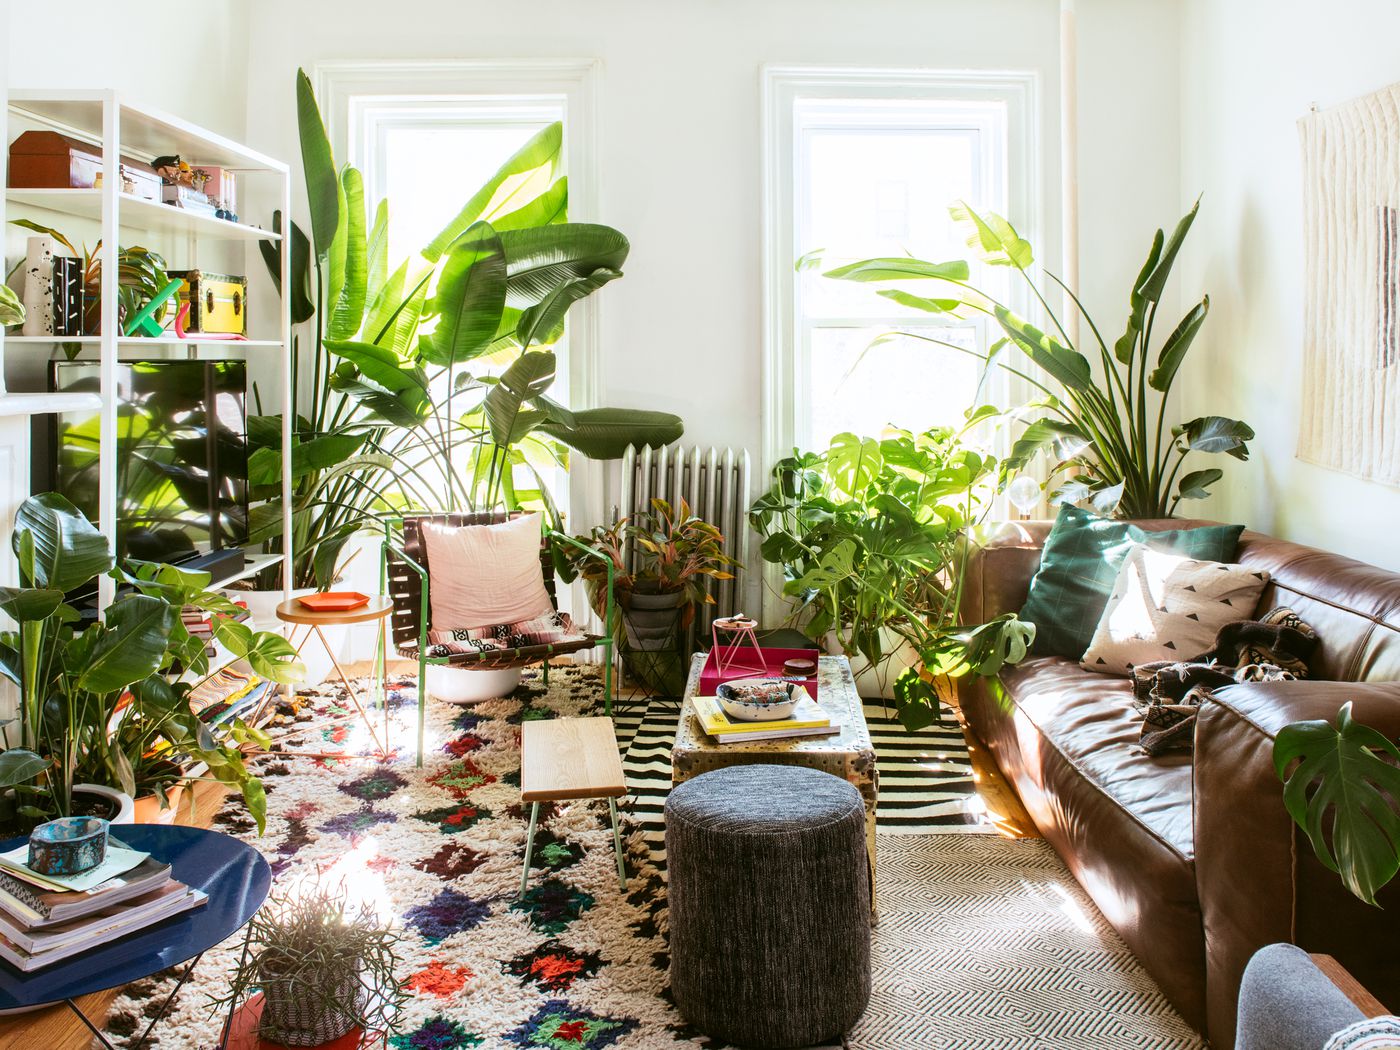 Why should you put plants in the living room?